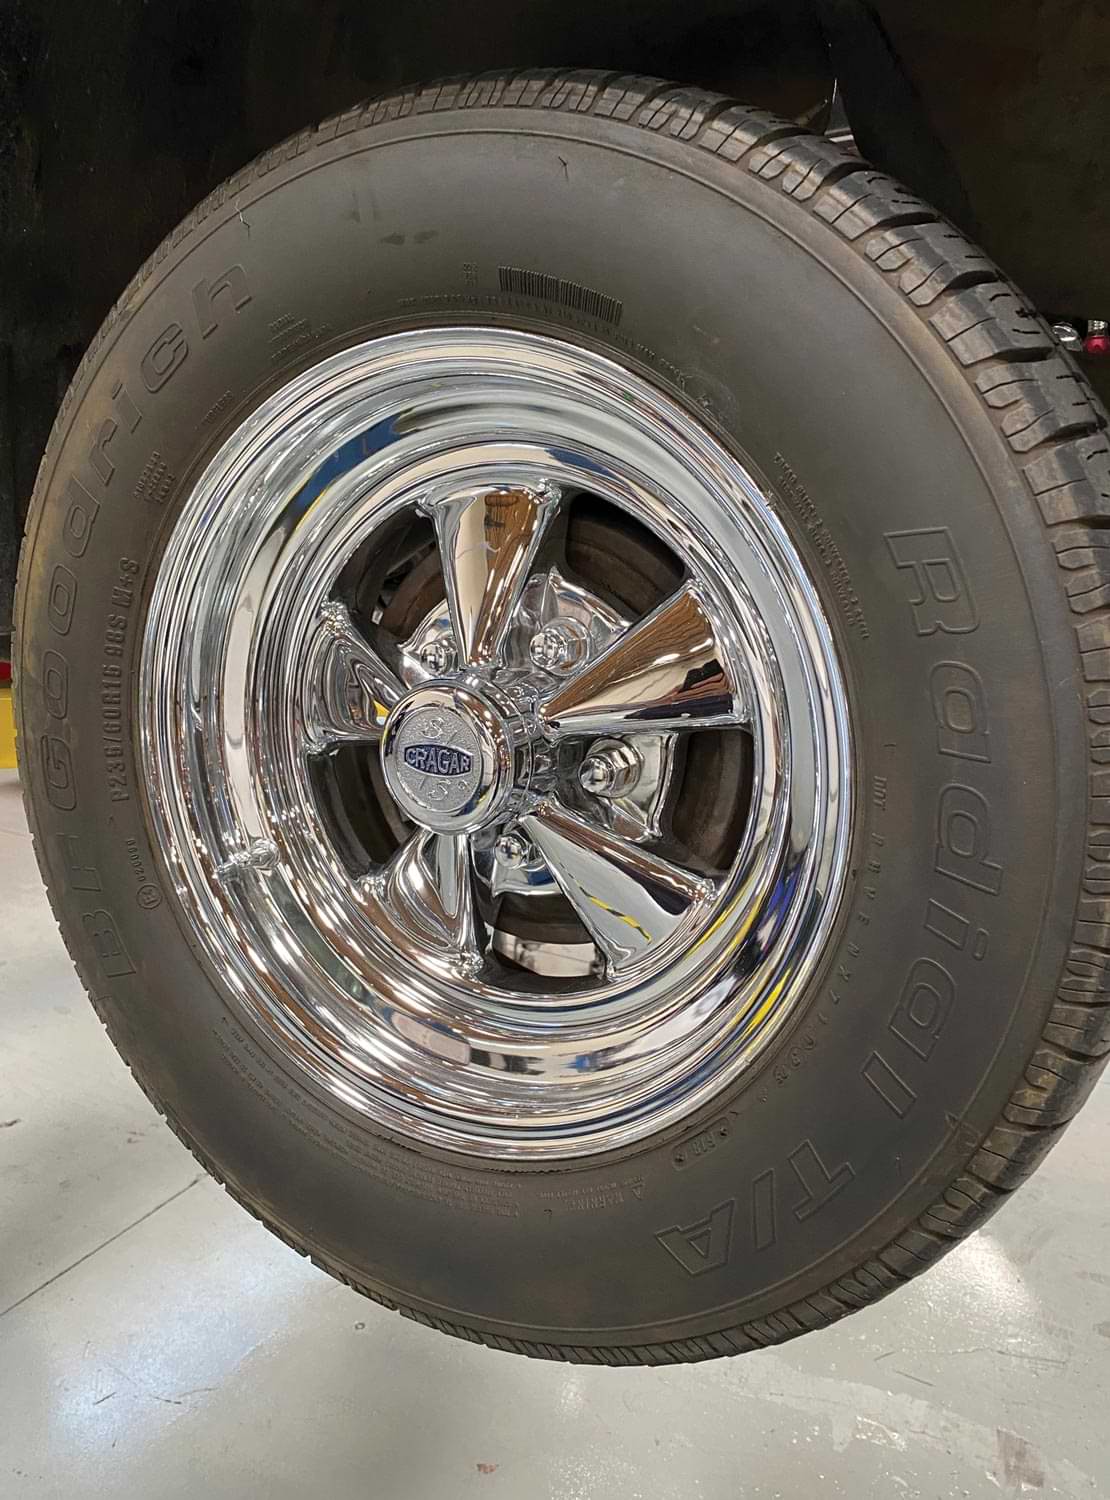 close up of on of the Chevelle's period-perfect Cragar S/S wheels still attached to the car